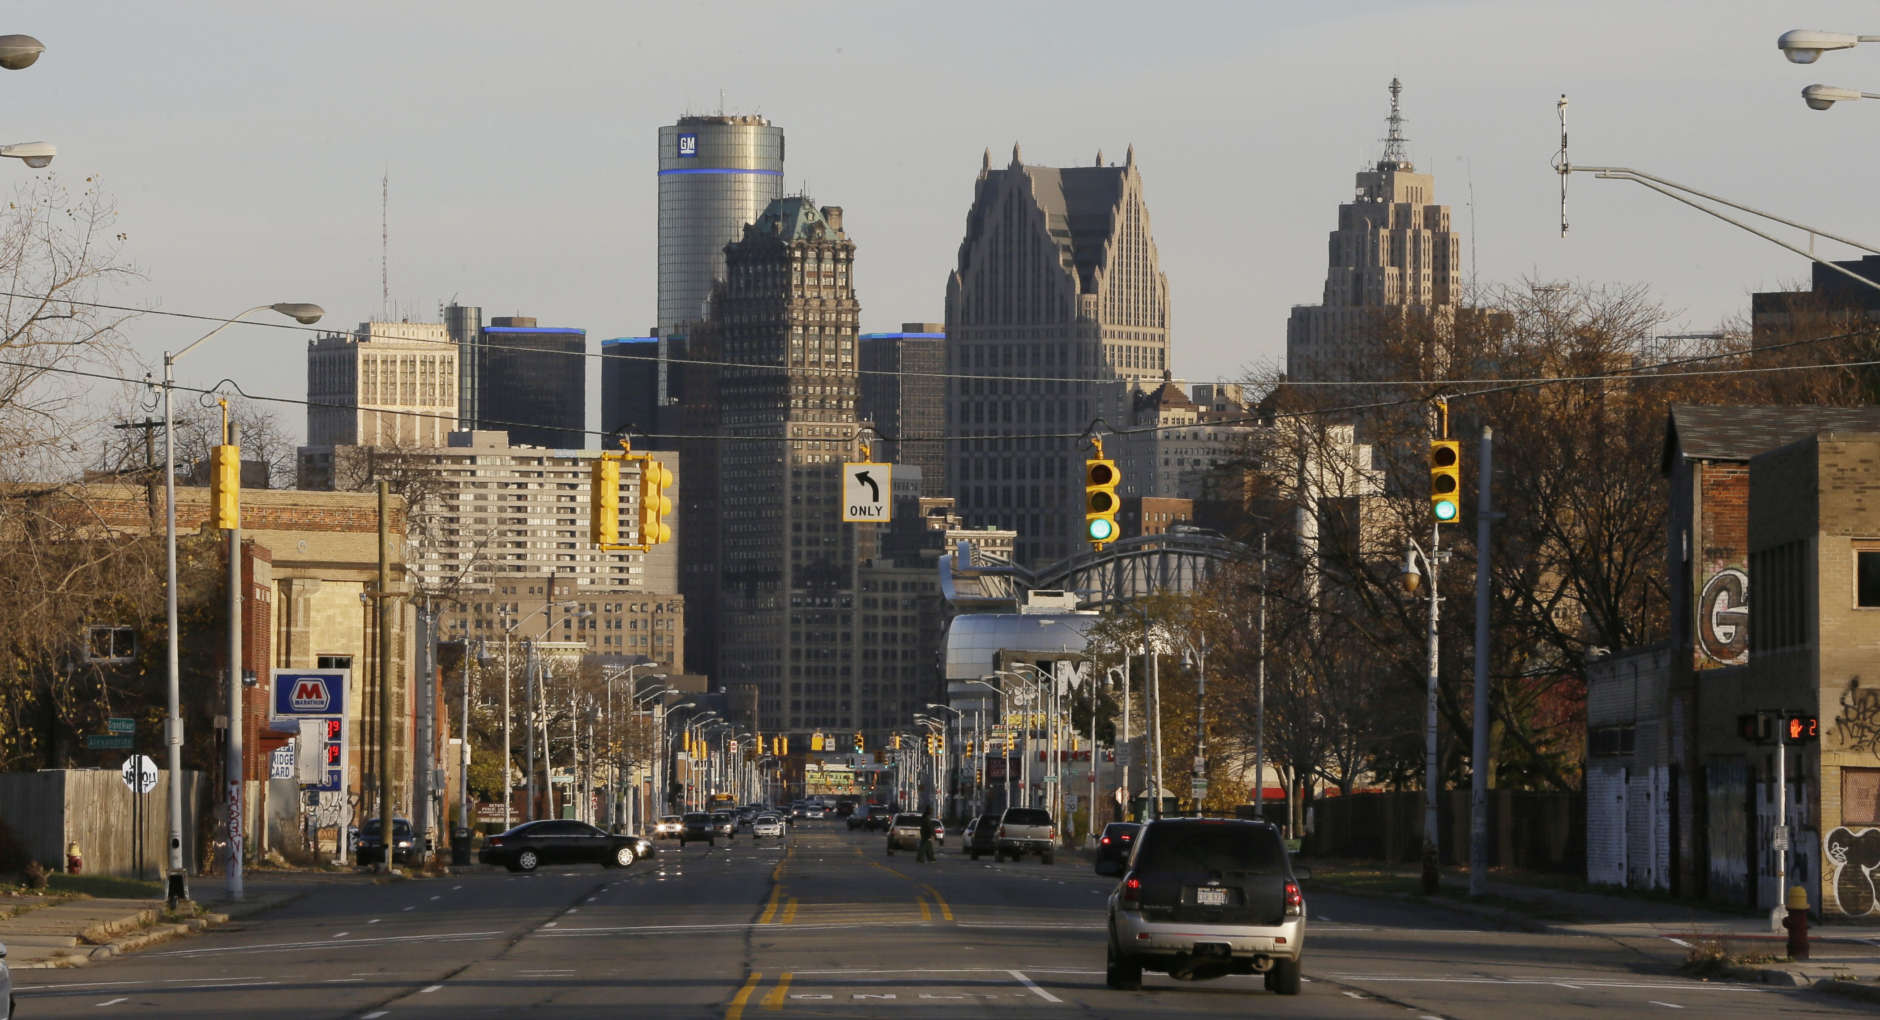 FILE - In this Nov. 7, 2014 file photo is the skyline of the city of Detroit. Detroit told a judge Monday, Nov. 24, 2014, that the city needs a few more weeks before it's ready to officially get out of bankruptcy. (AP Photo/Carlos Osorio, File)